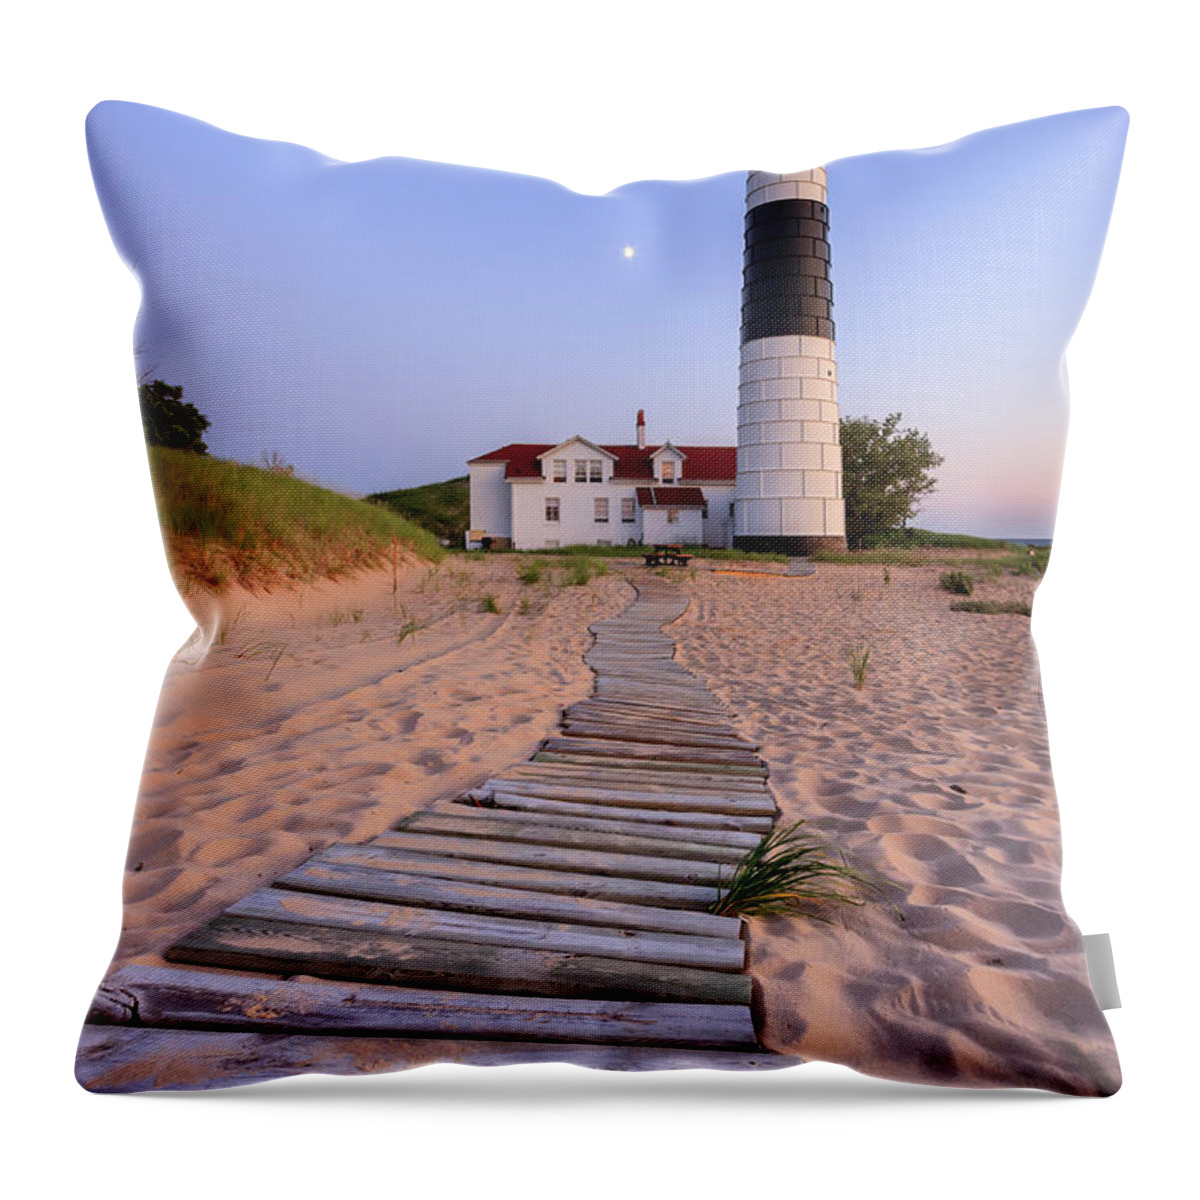 3scape Photos Throw Pillow featuring the photograph Big Sable Point Lighthouse by Adam Romanowicz